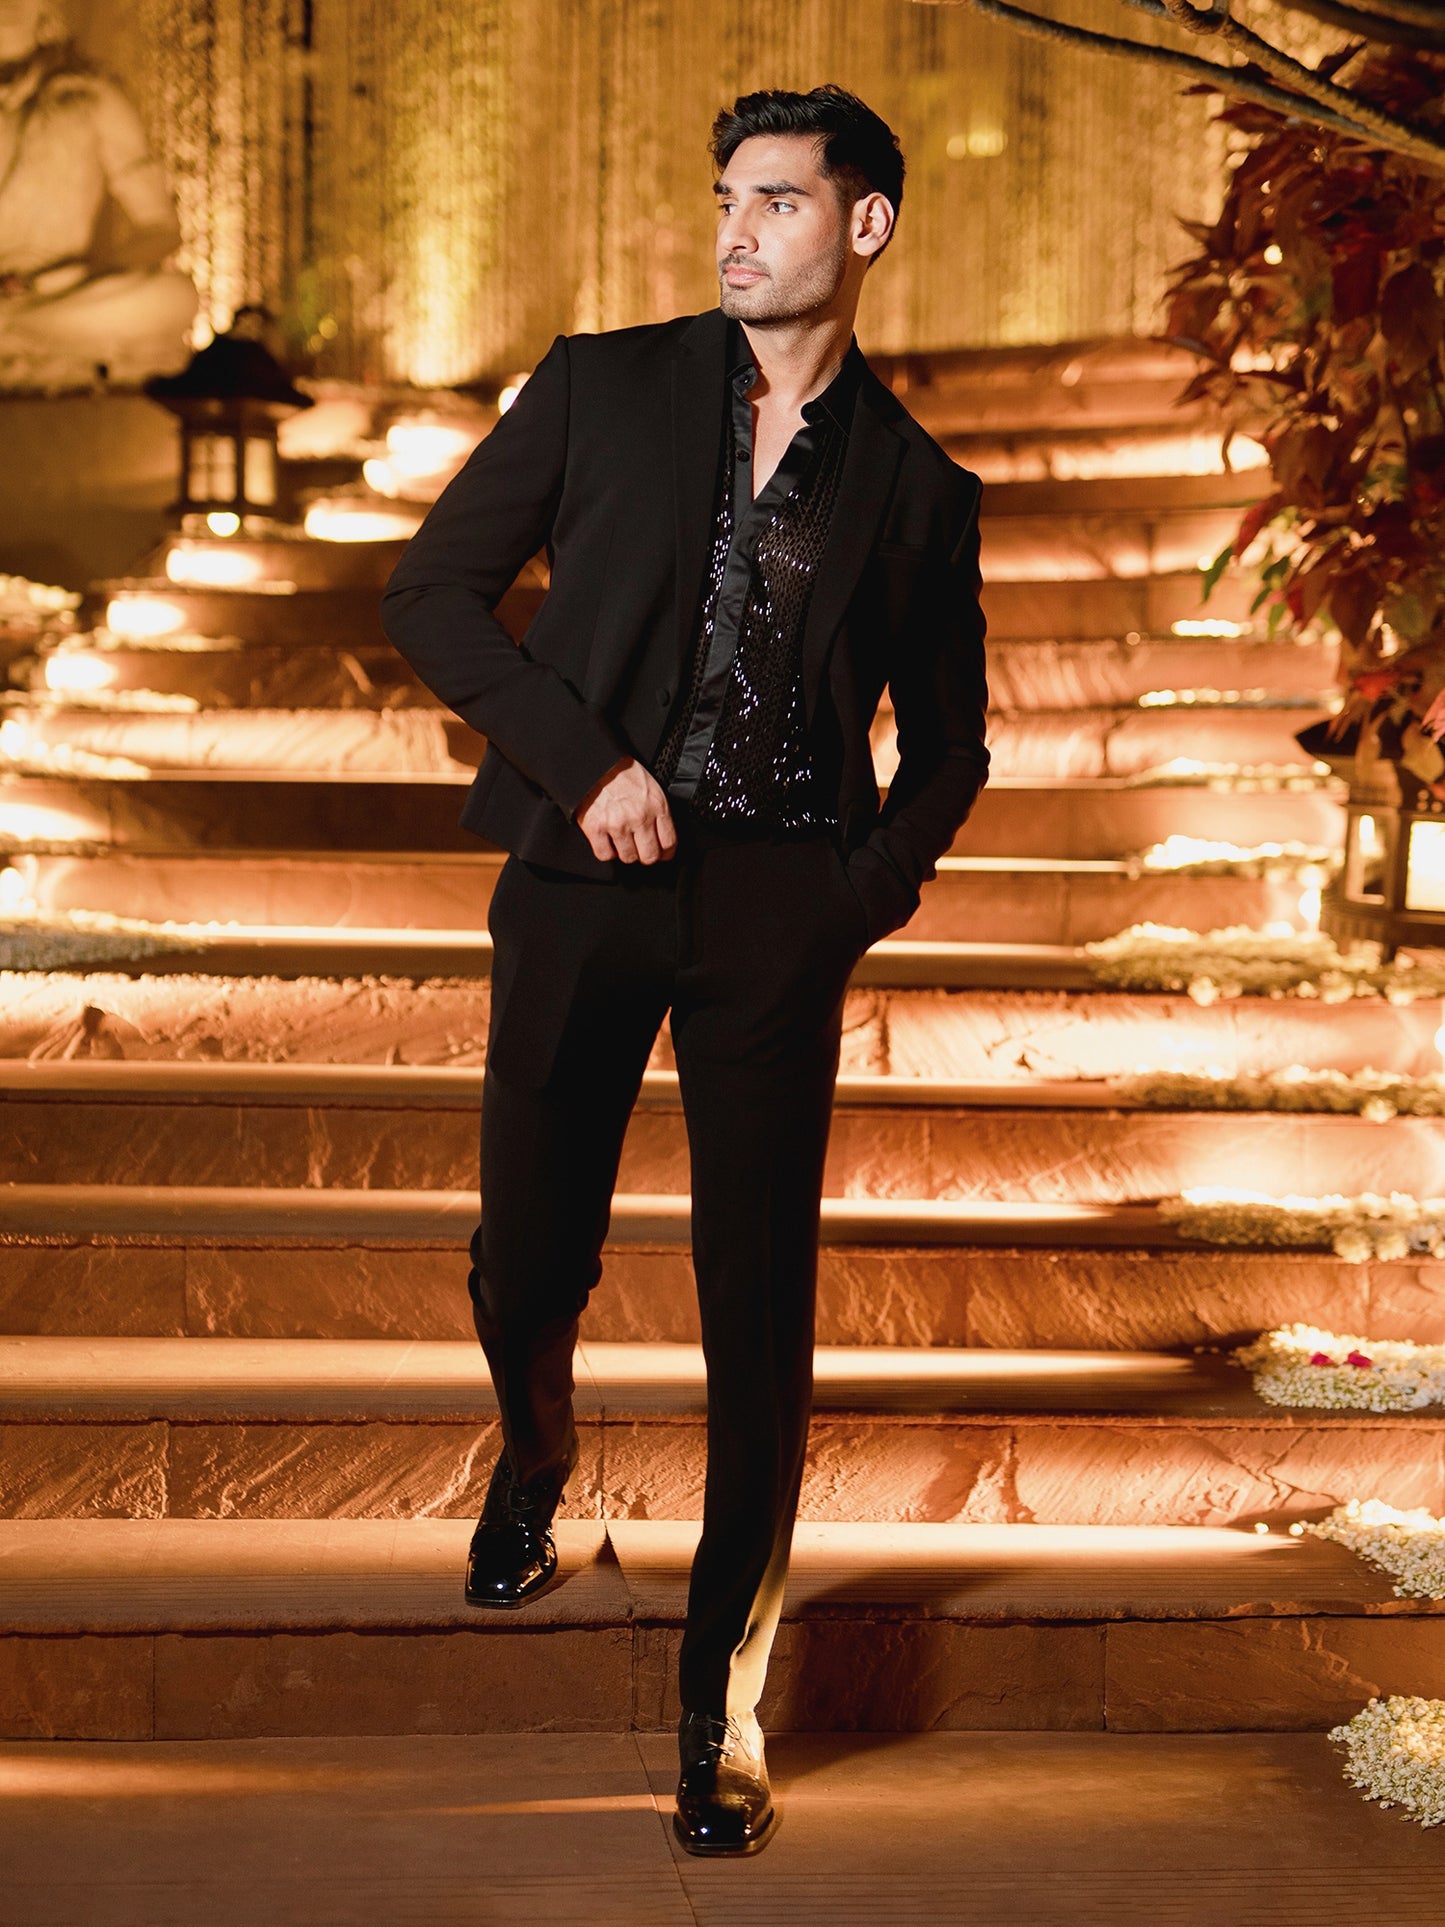 Black Tuxedo With Fully Sequins Shirt